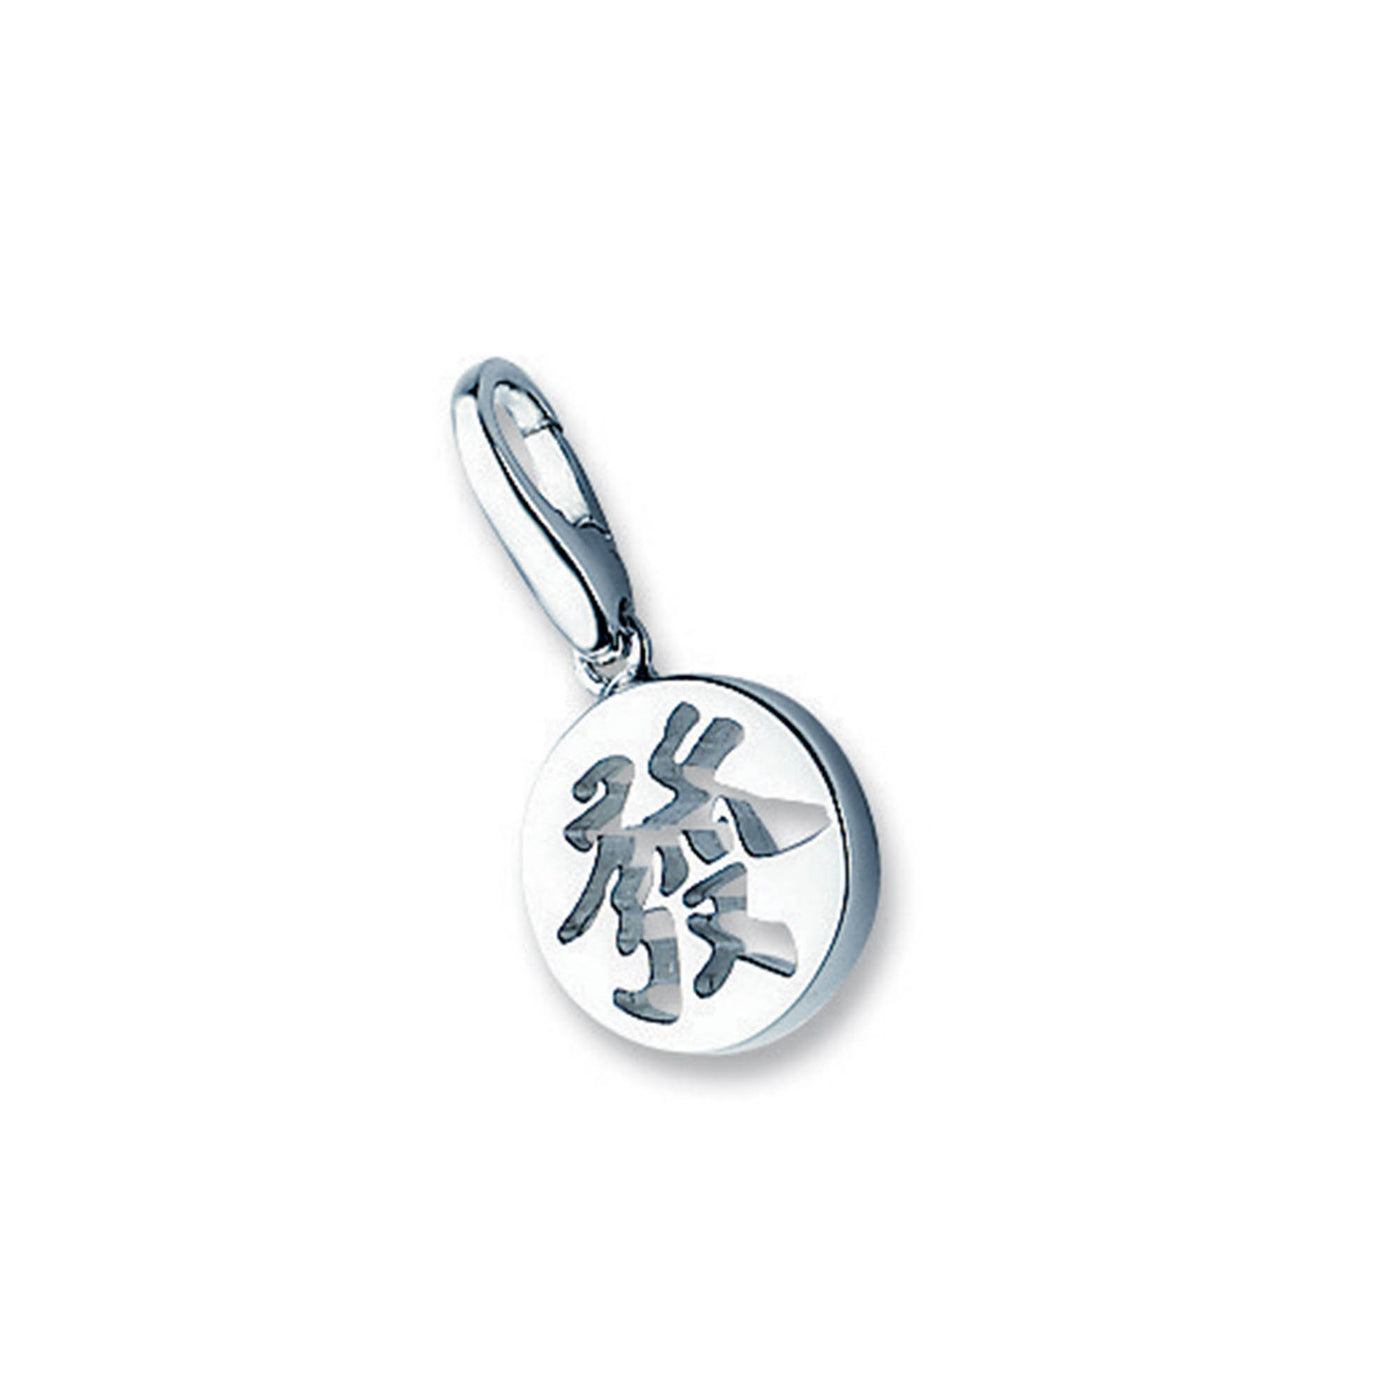 Rebecca Sloane Sterling Silver Symbol "Well-Being" Charm